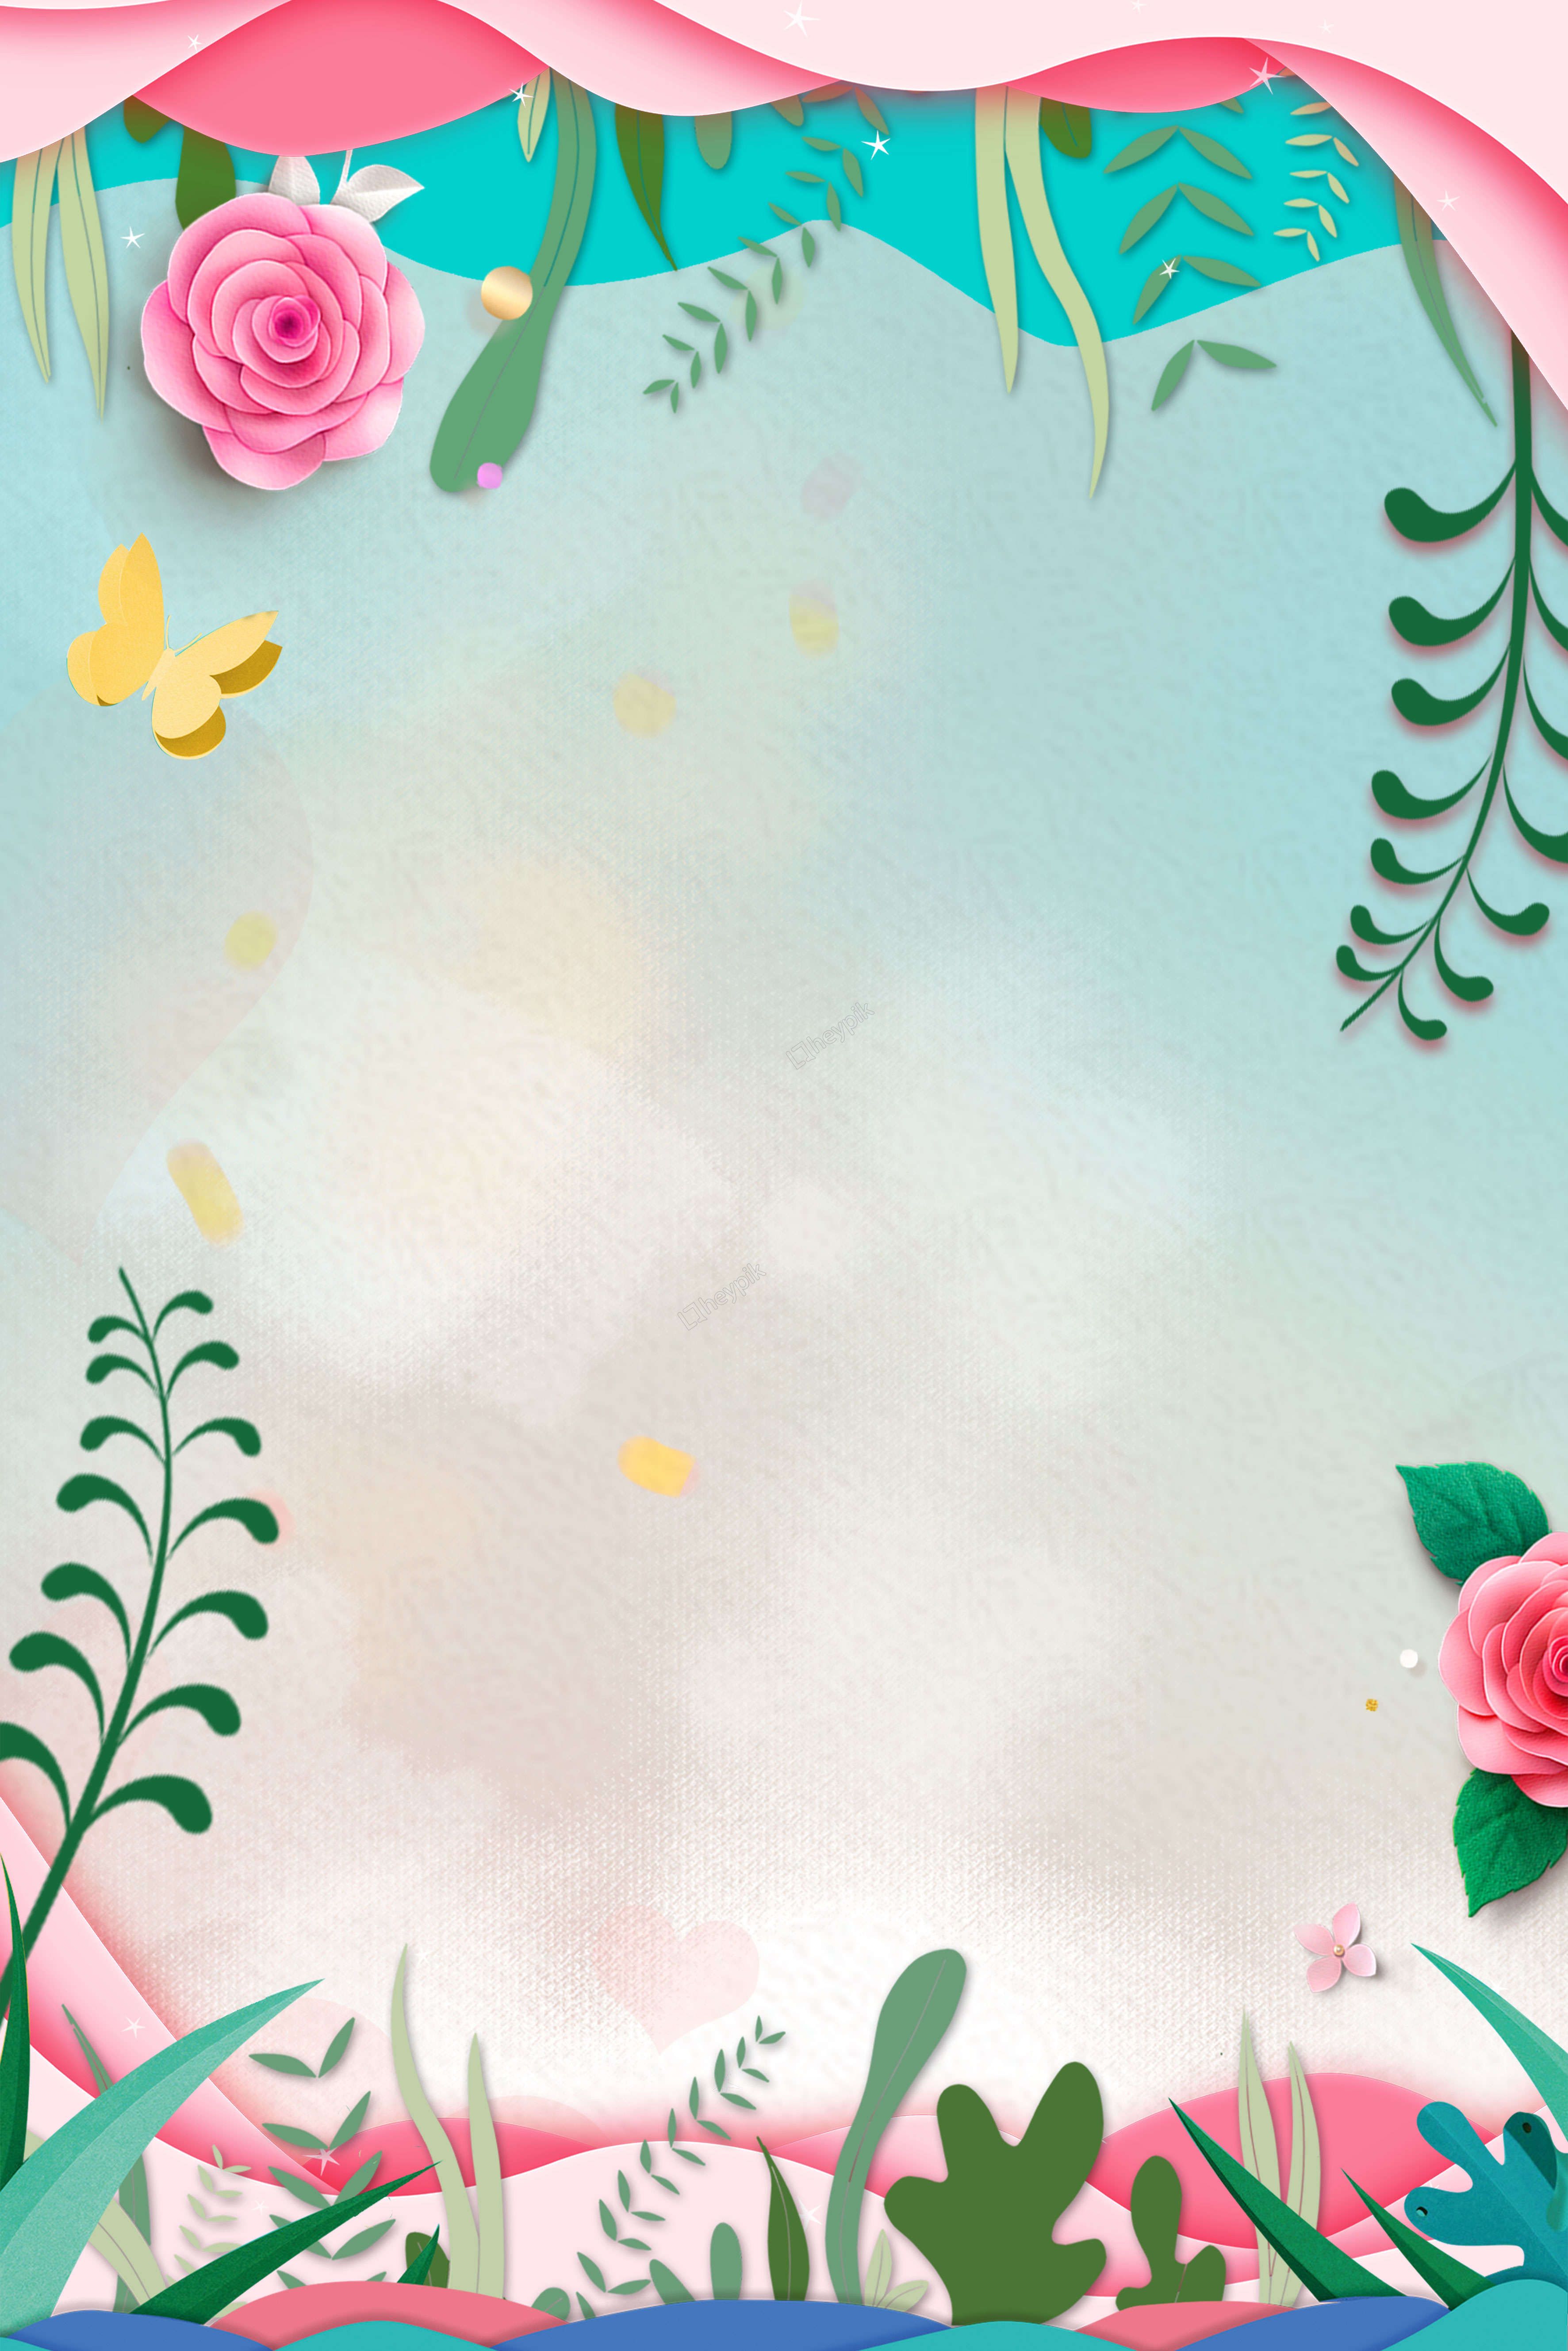 Floral Border Paper Cut Creative Background Synthesis Heypik In